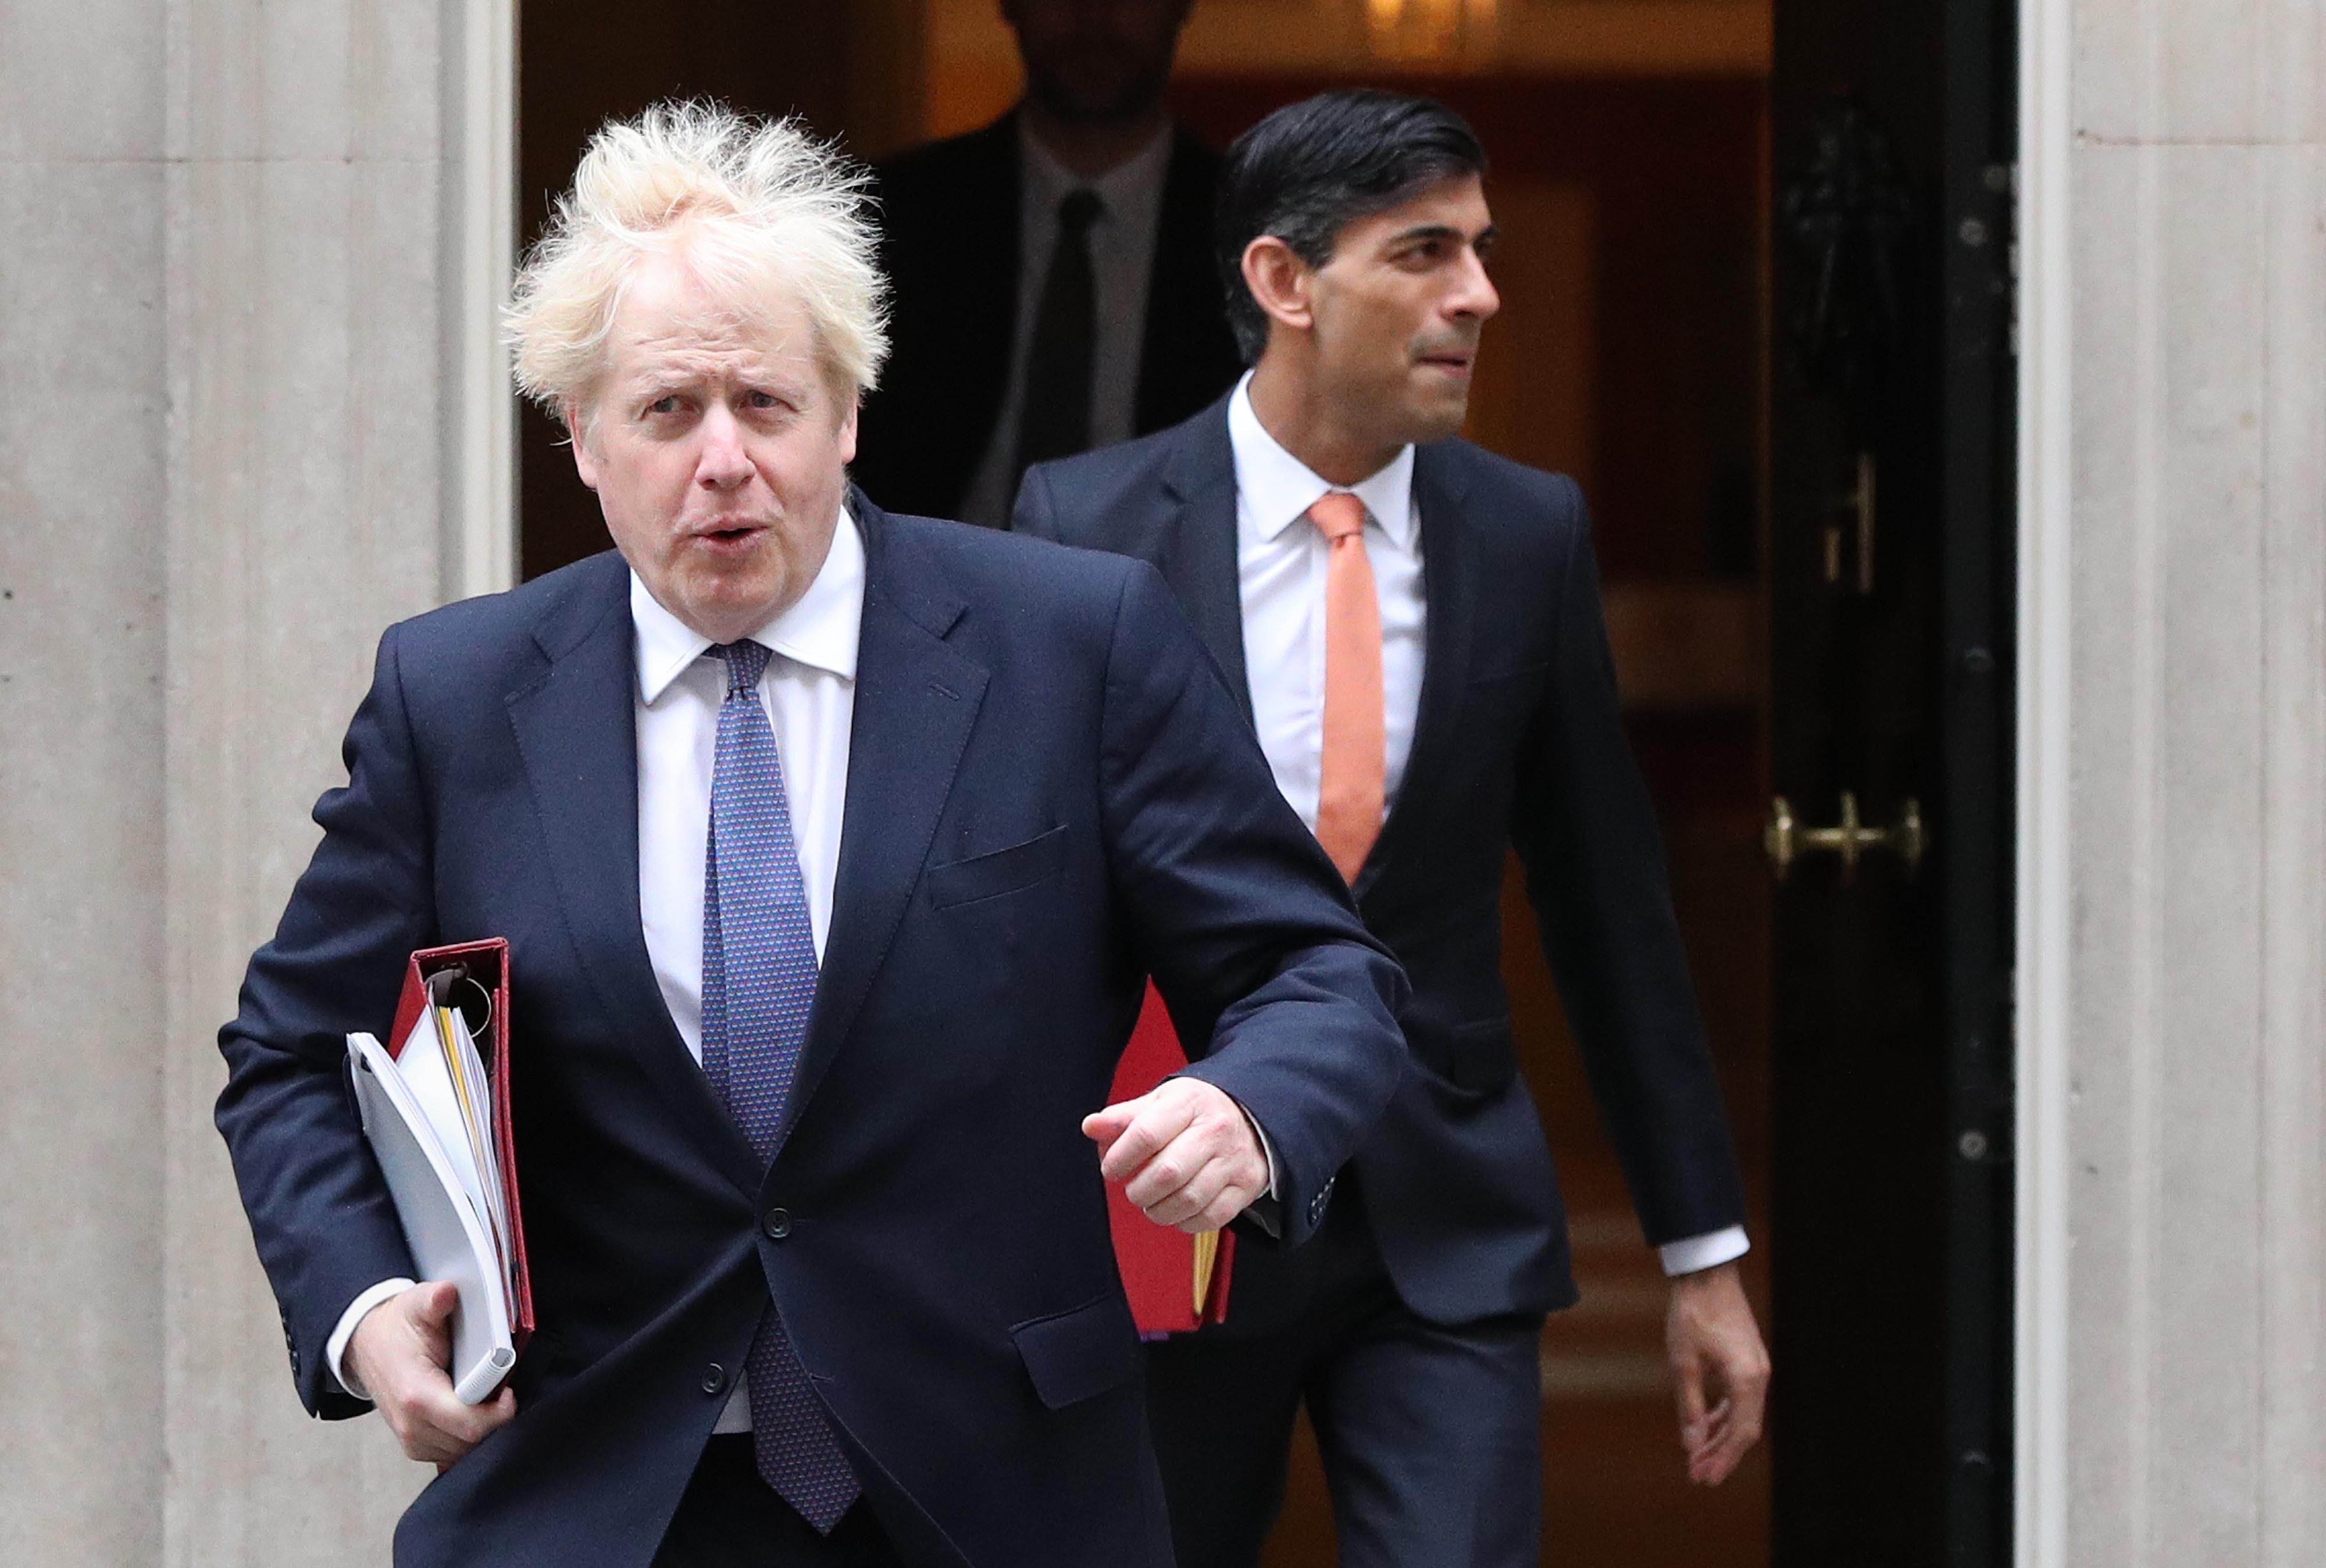 Prime Minister Boris Johnson (left) and Chancellor Rishi Sunak have both been told to self-isolate